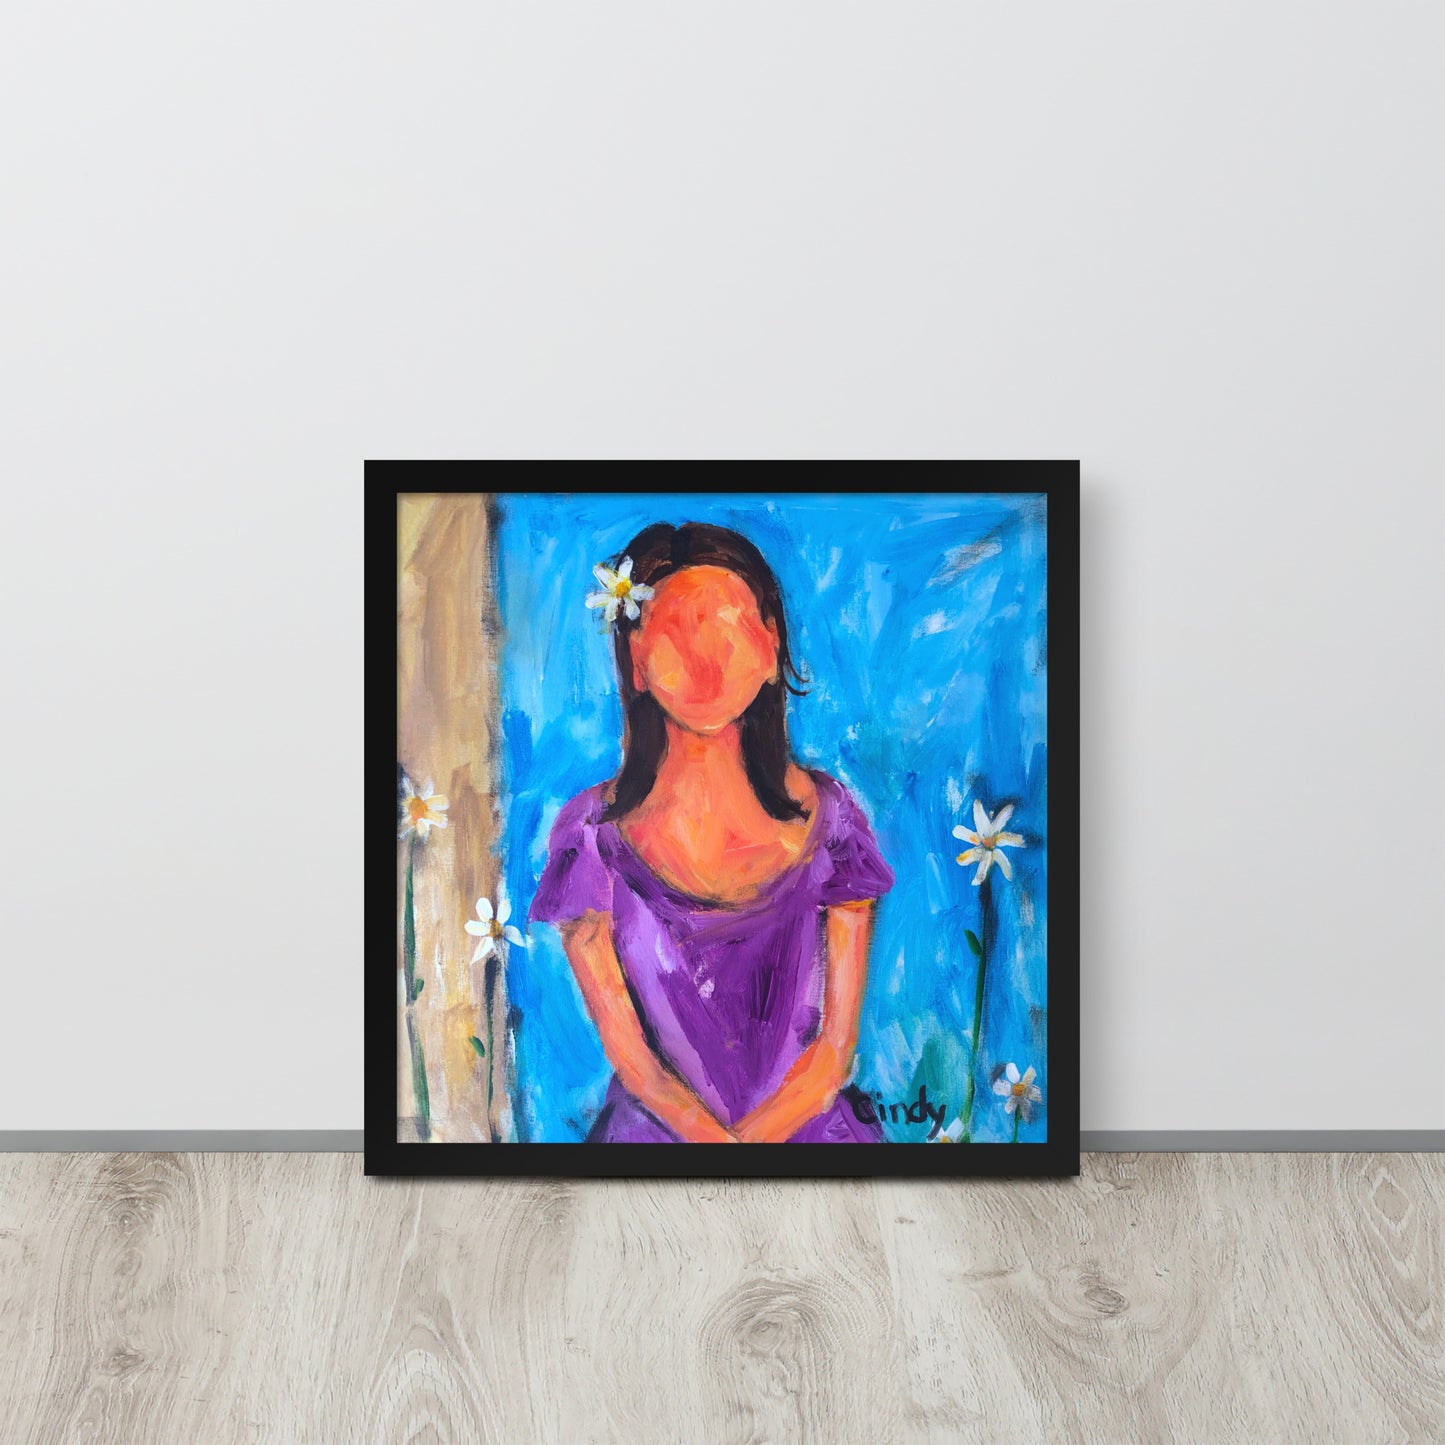 Purple Dress By Cindy Motley Framed poster